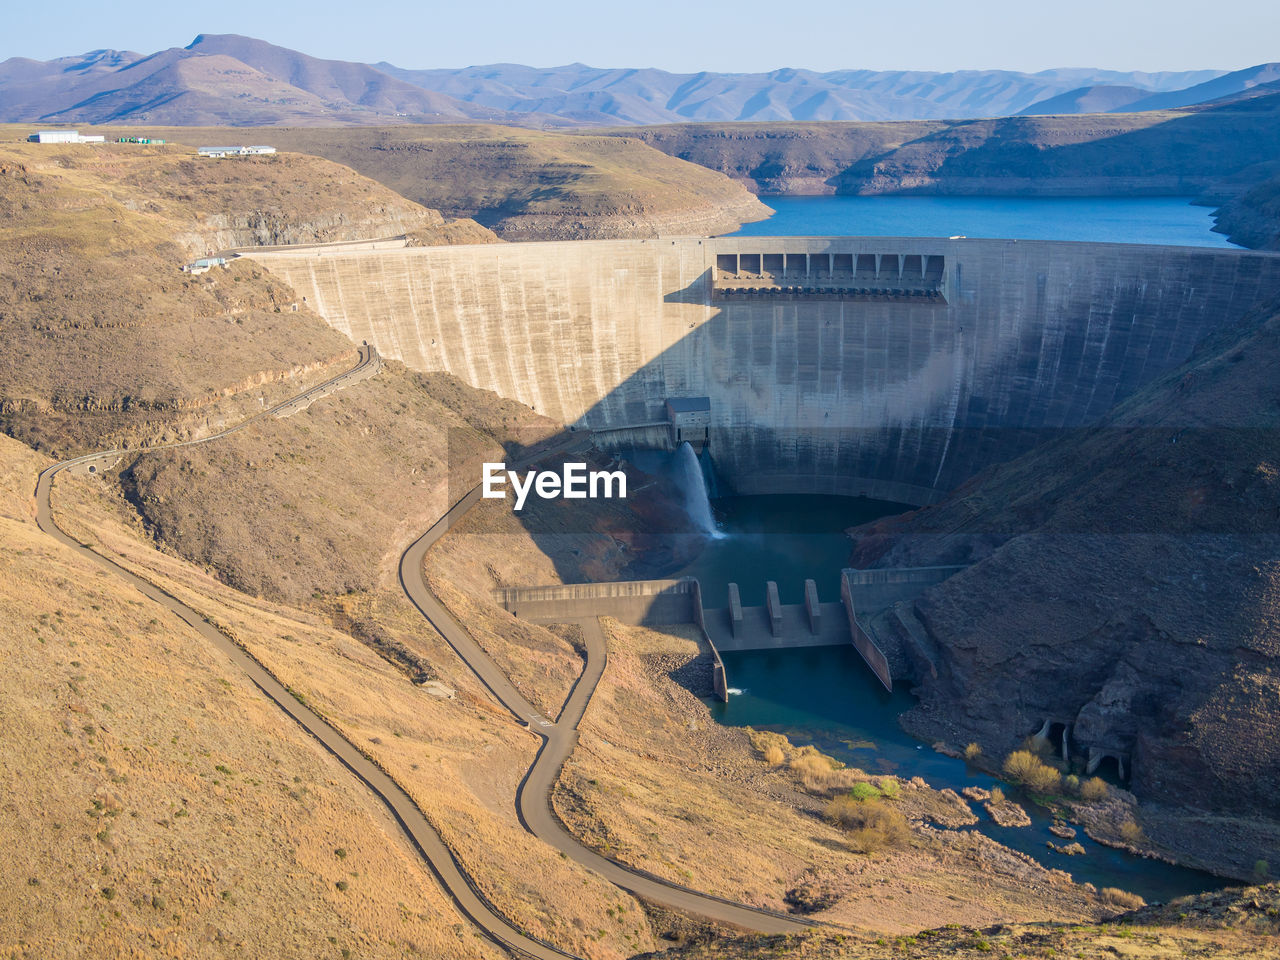 High angle view of katse dam hydroelectric power plant in mountains of lesotho, africa